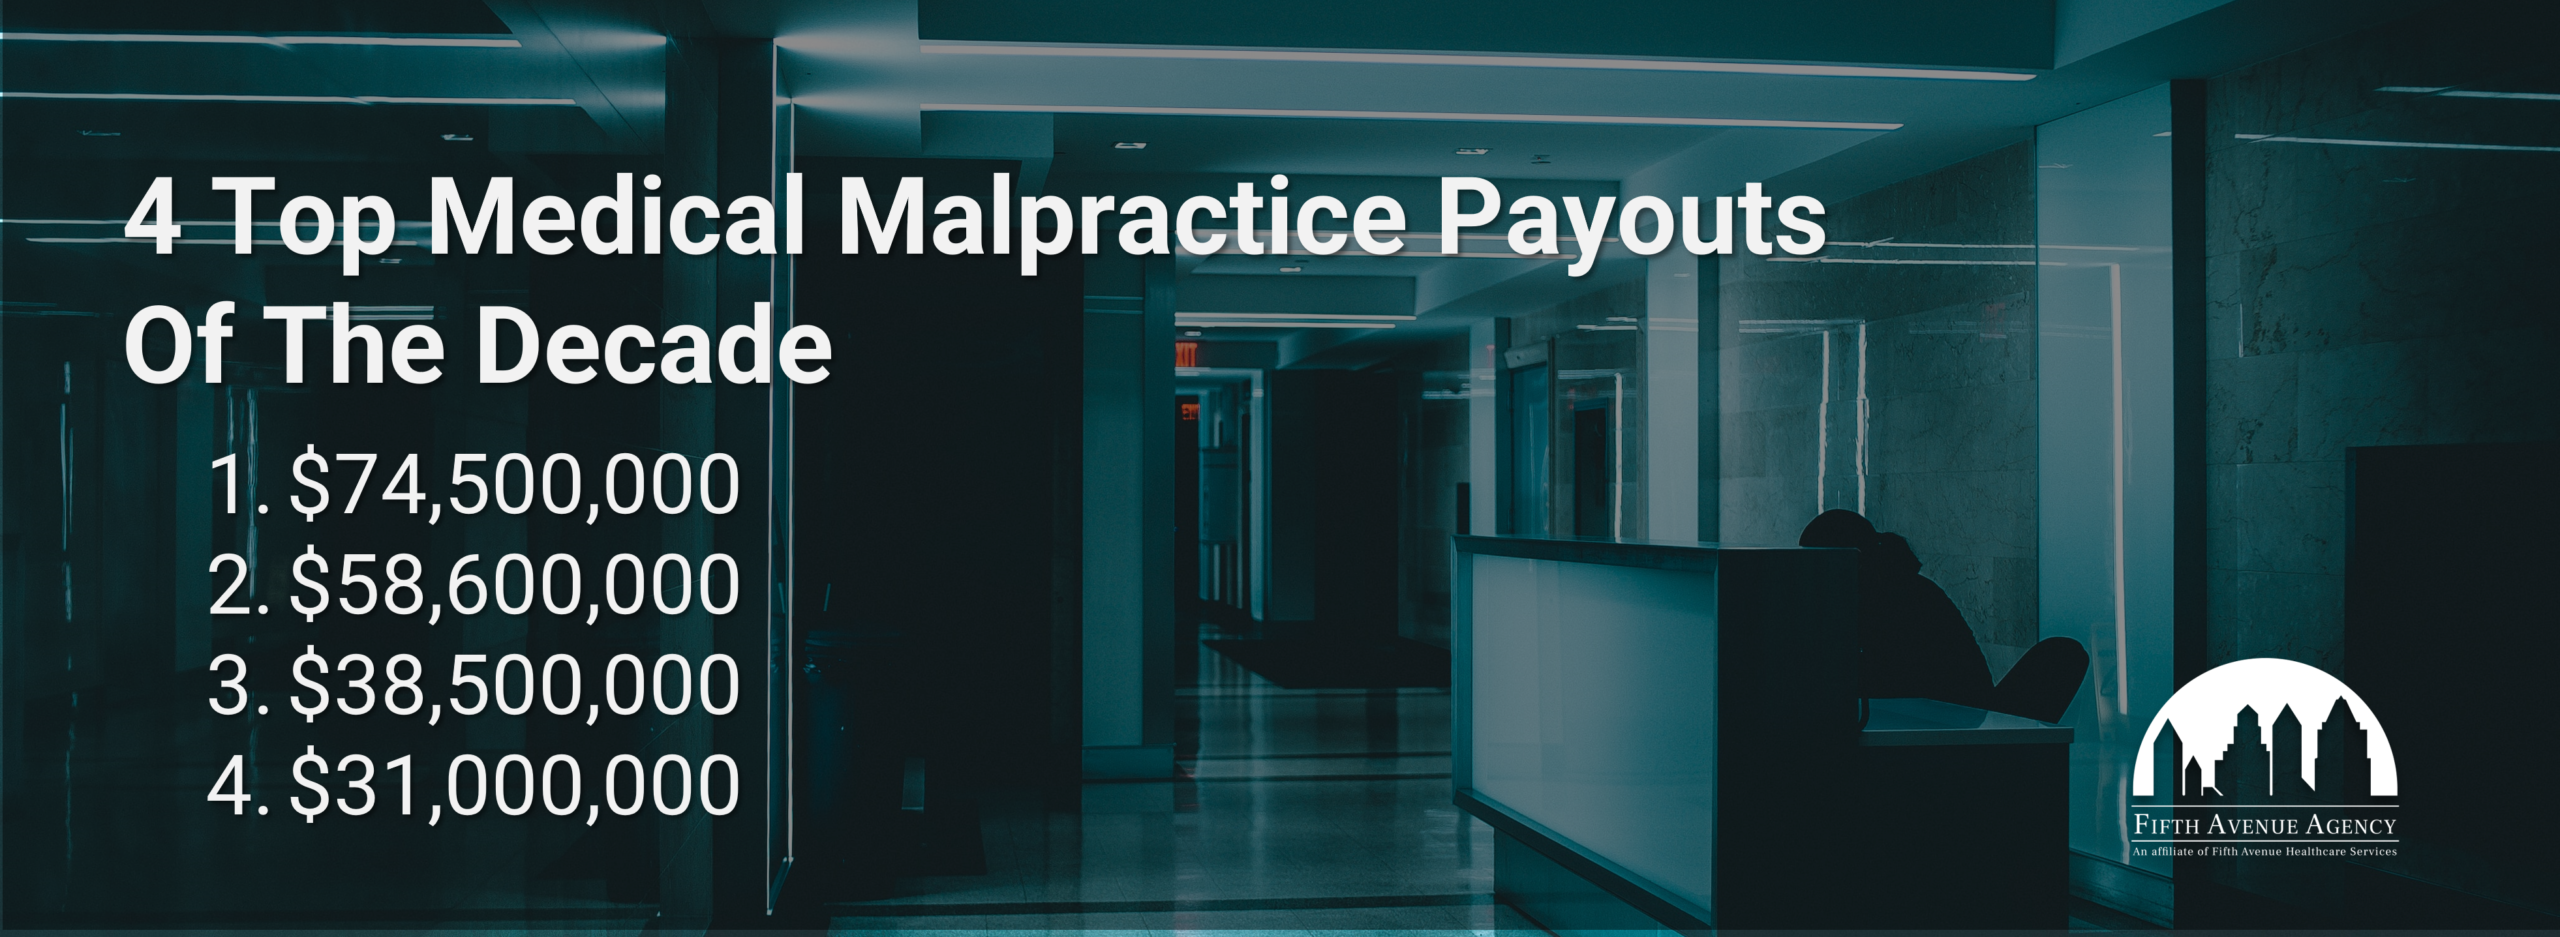 4 Top Medical Malpractice Payouts Of The Decade